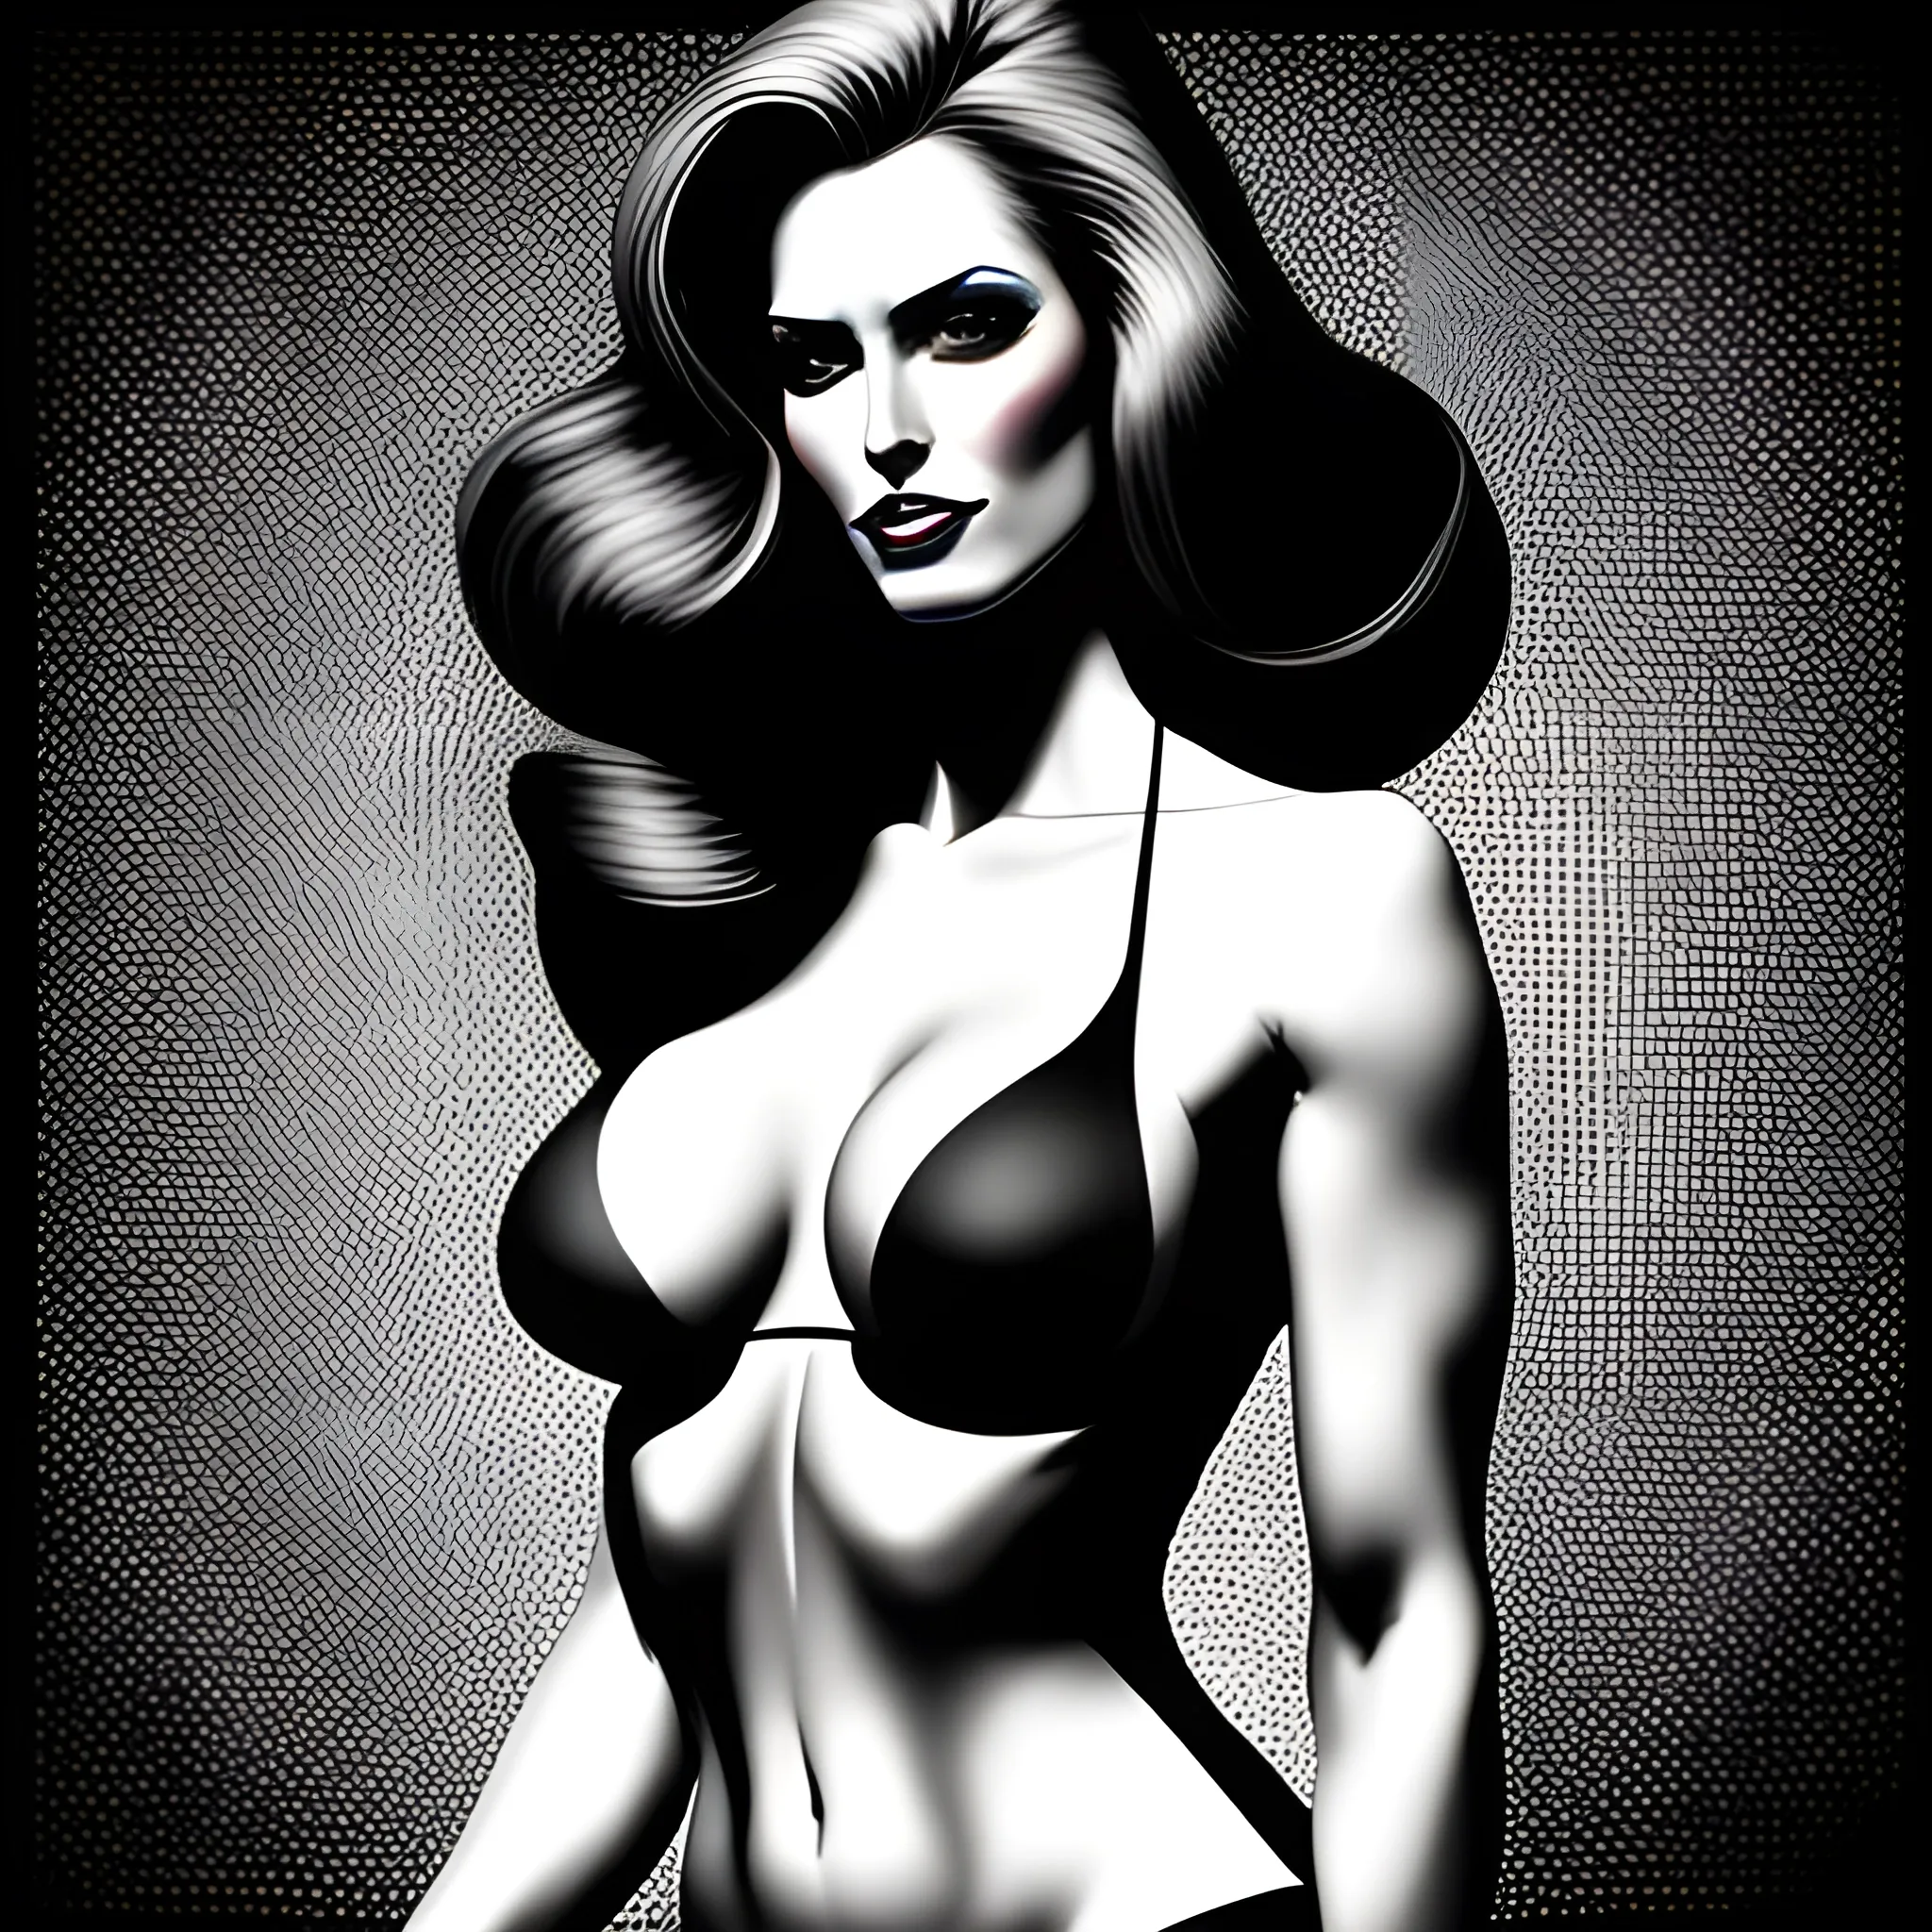 Digital art colorful girl body drawing with, in the style of black - and - white graphic, bold colorful lines, airbrush art, flickr, dark chiaroscuro contrasts, 1970s, detailed perfection